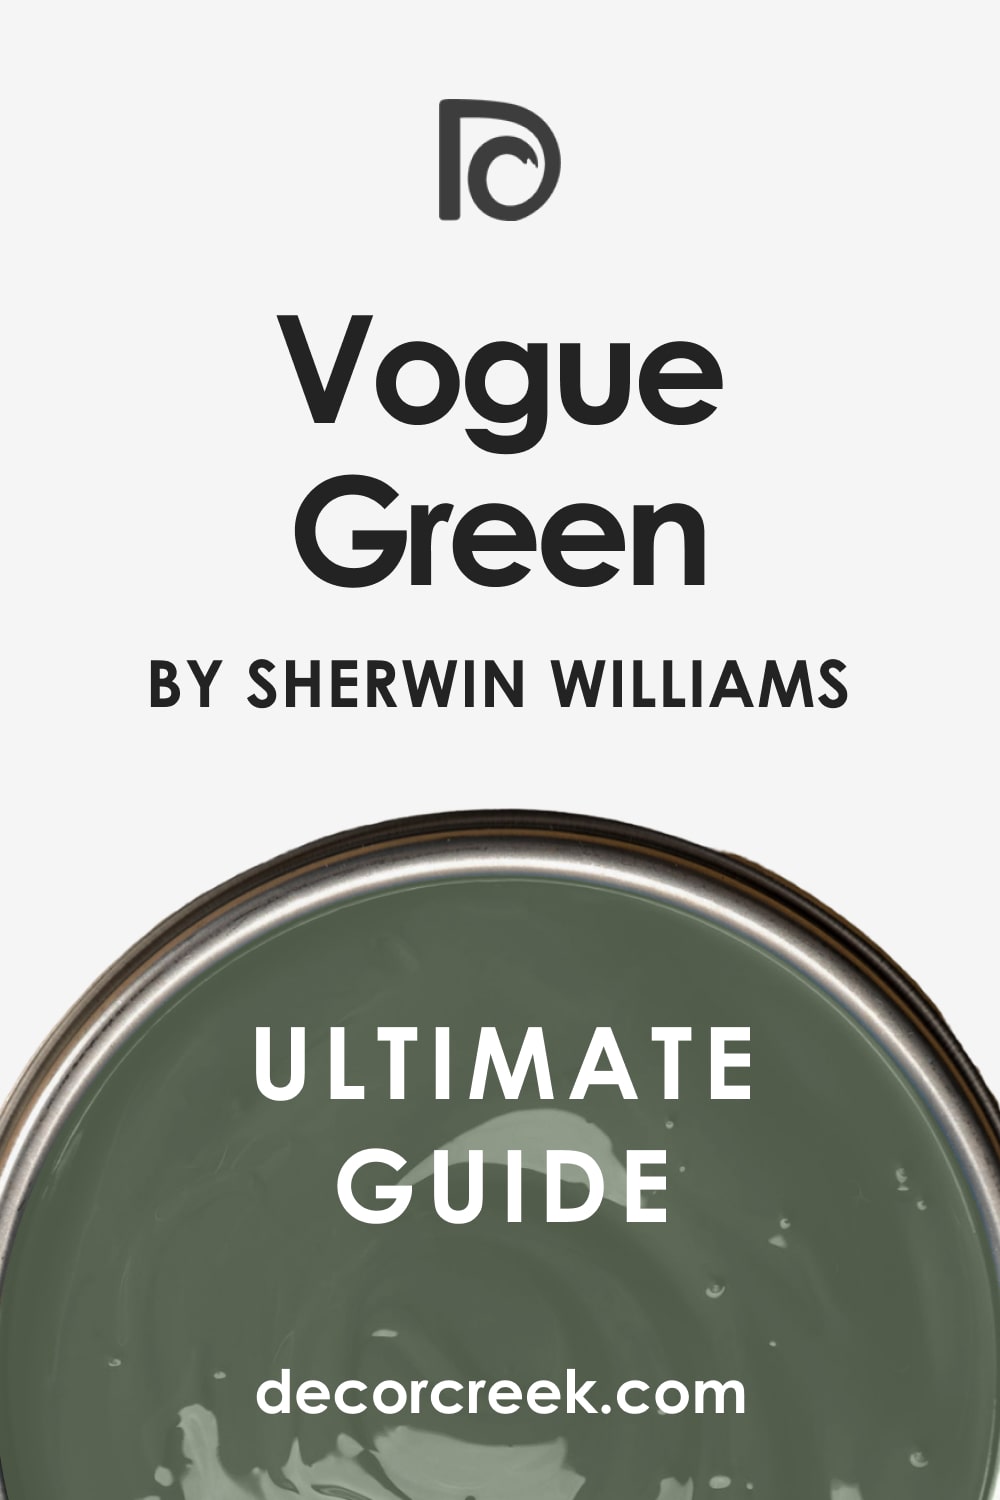 Ultimate Guide of Vogue Green paint colors